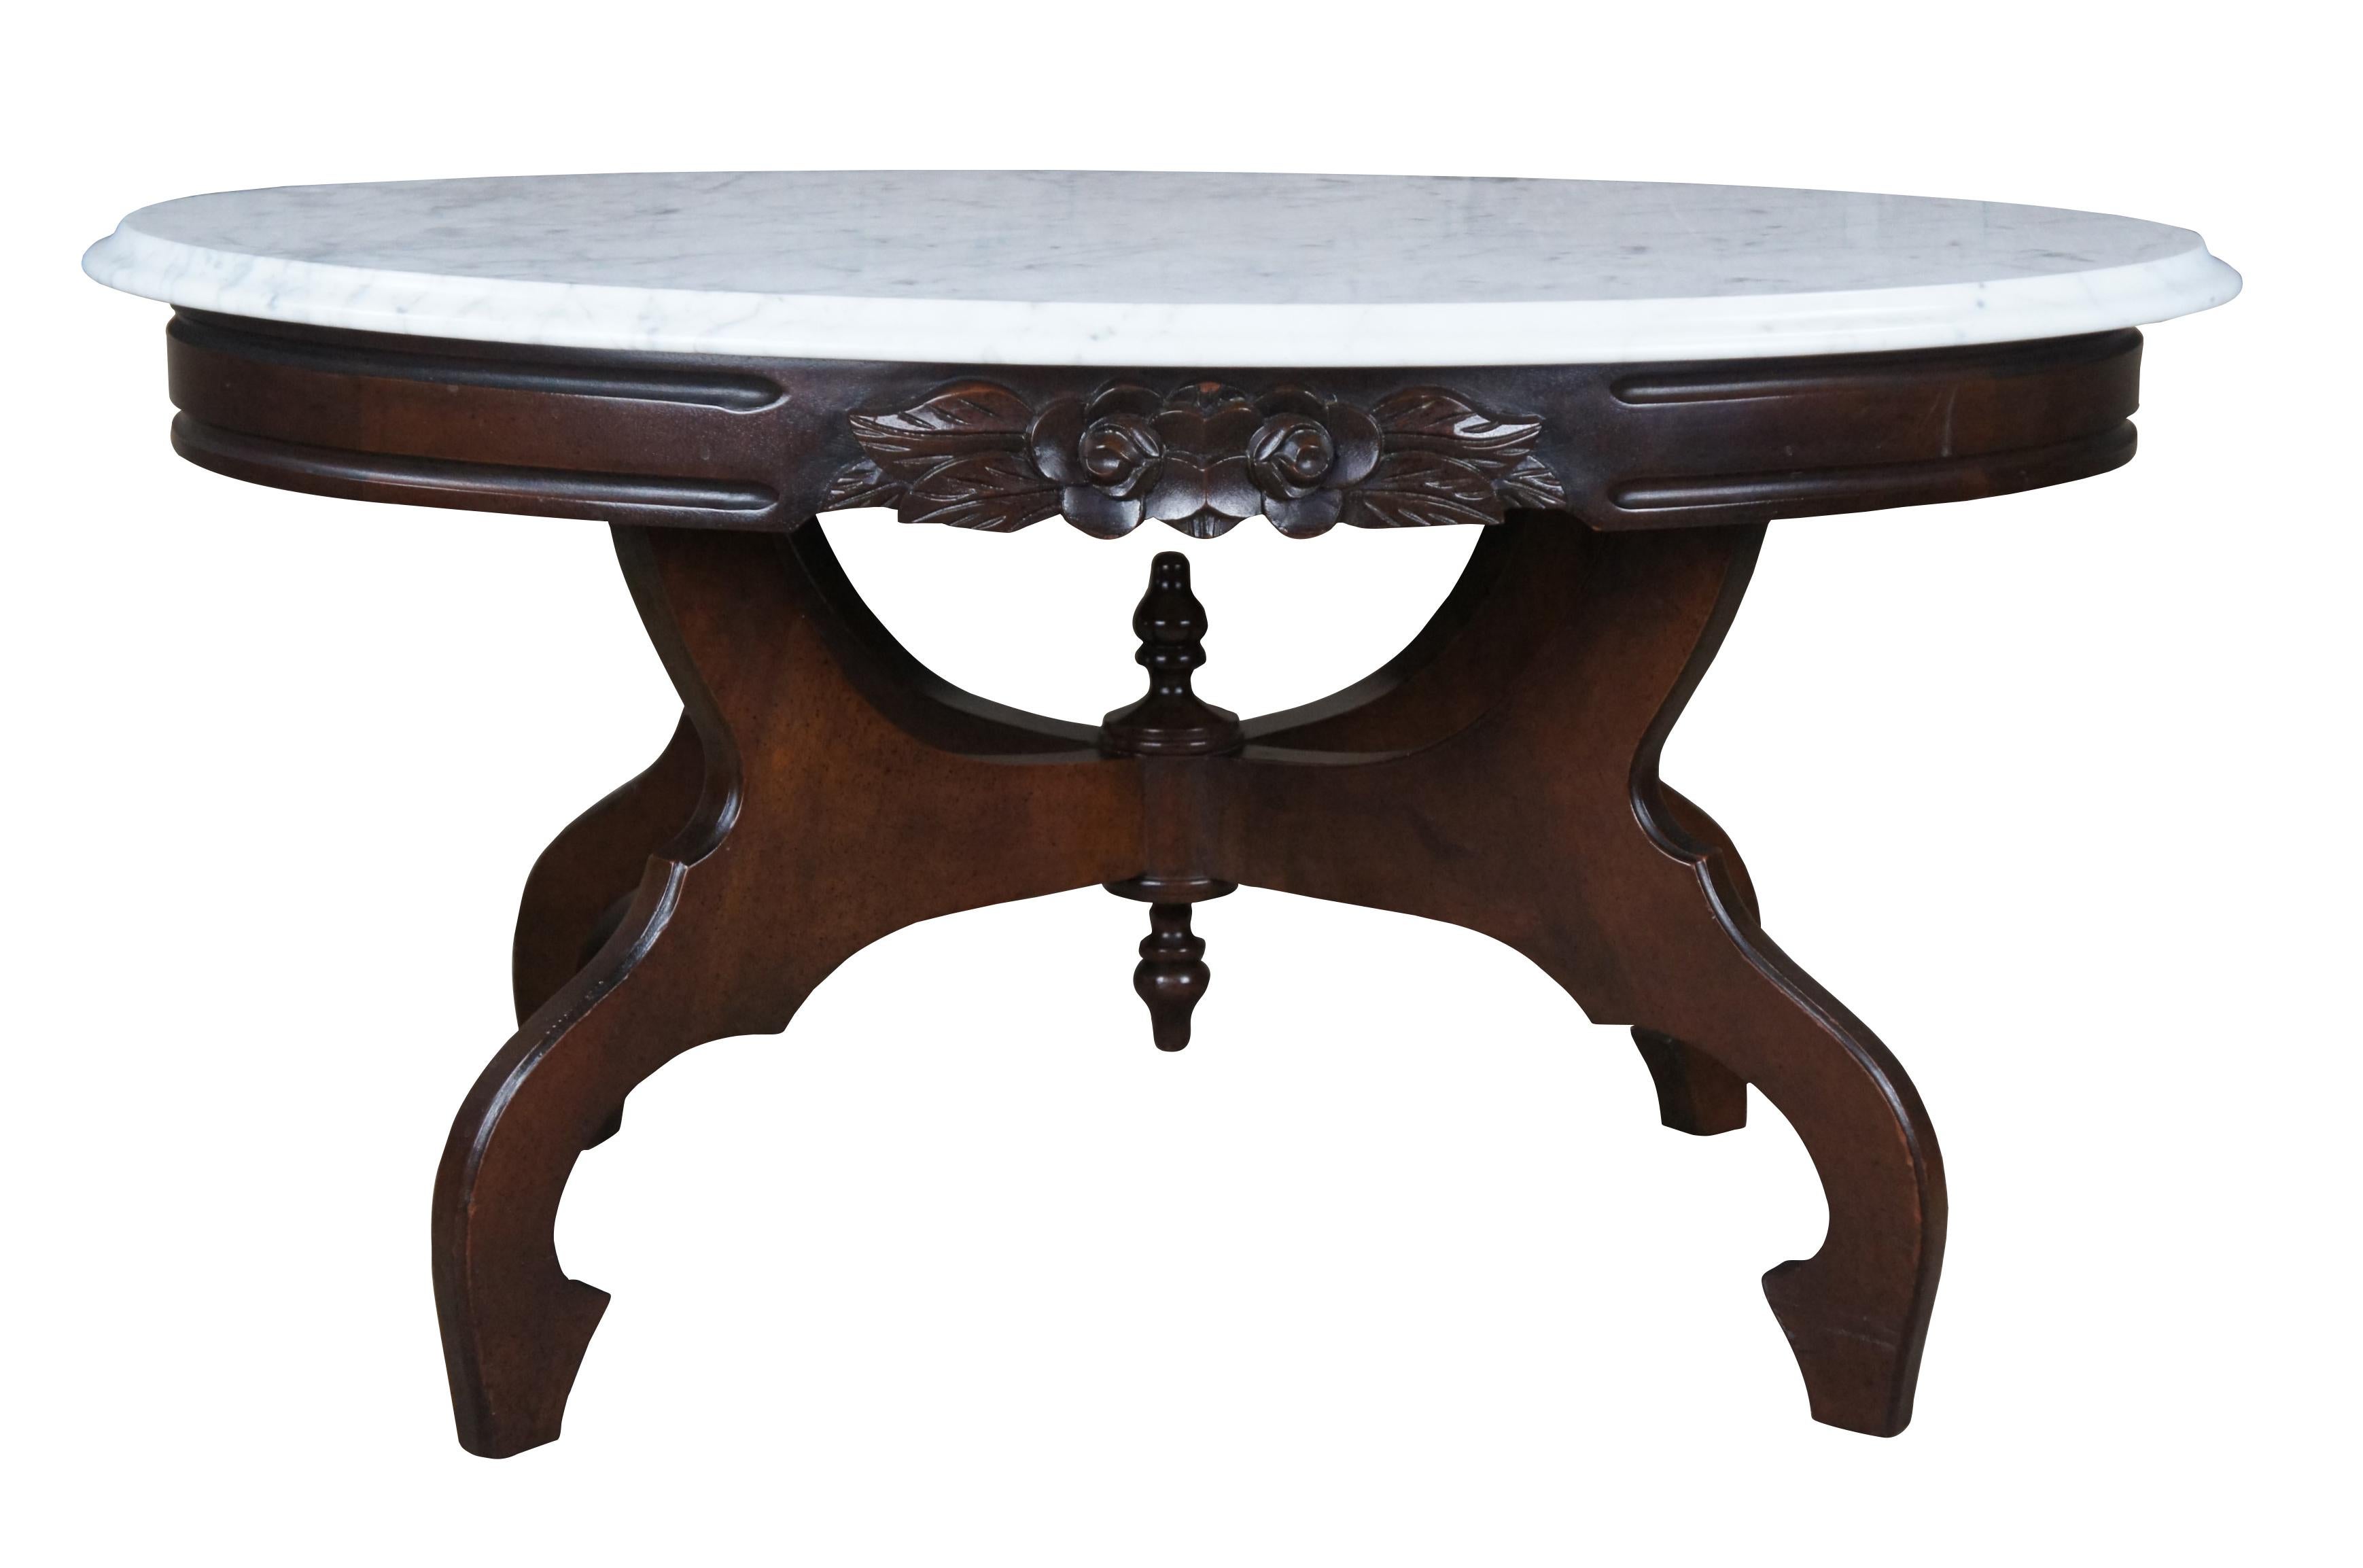 Vintage Victorian Revival parlor table by Kimball Furniture. Made from mahogany with an oval white Italian marble top. Features a rose carved apron over a four legged base centered by finials. Measure: 34